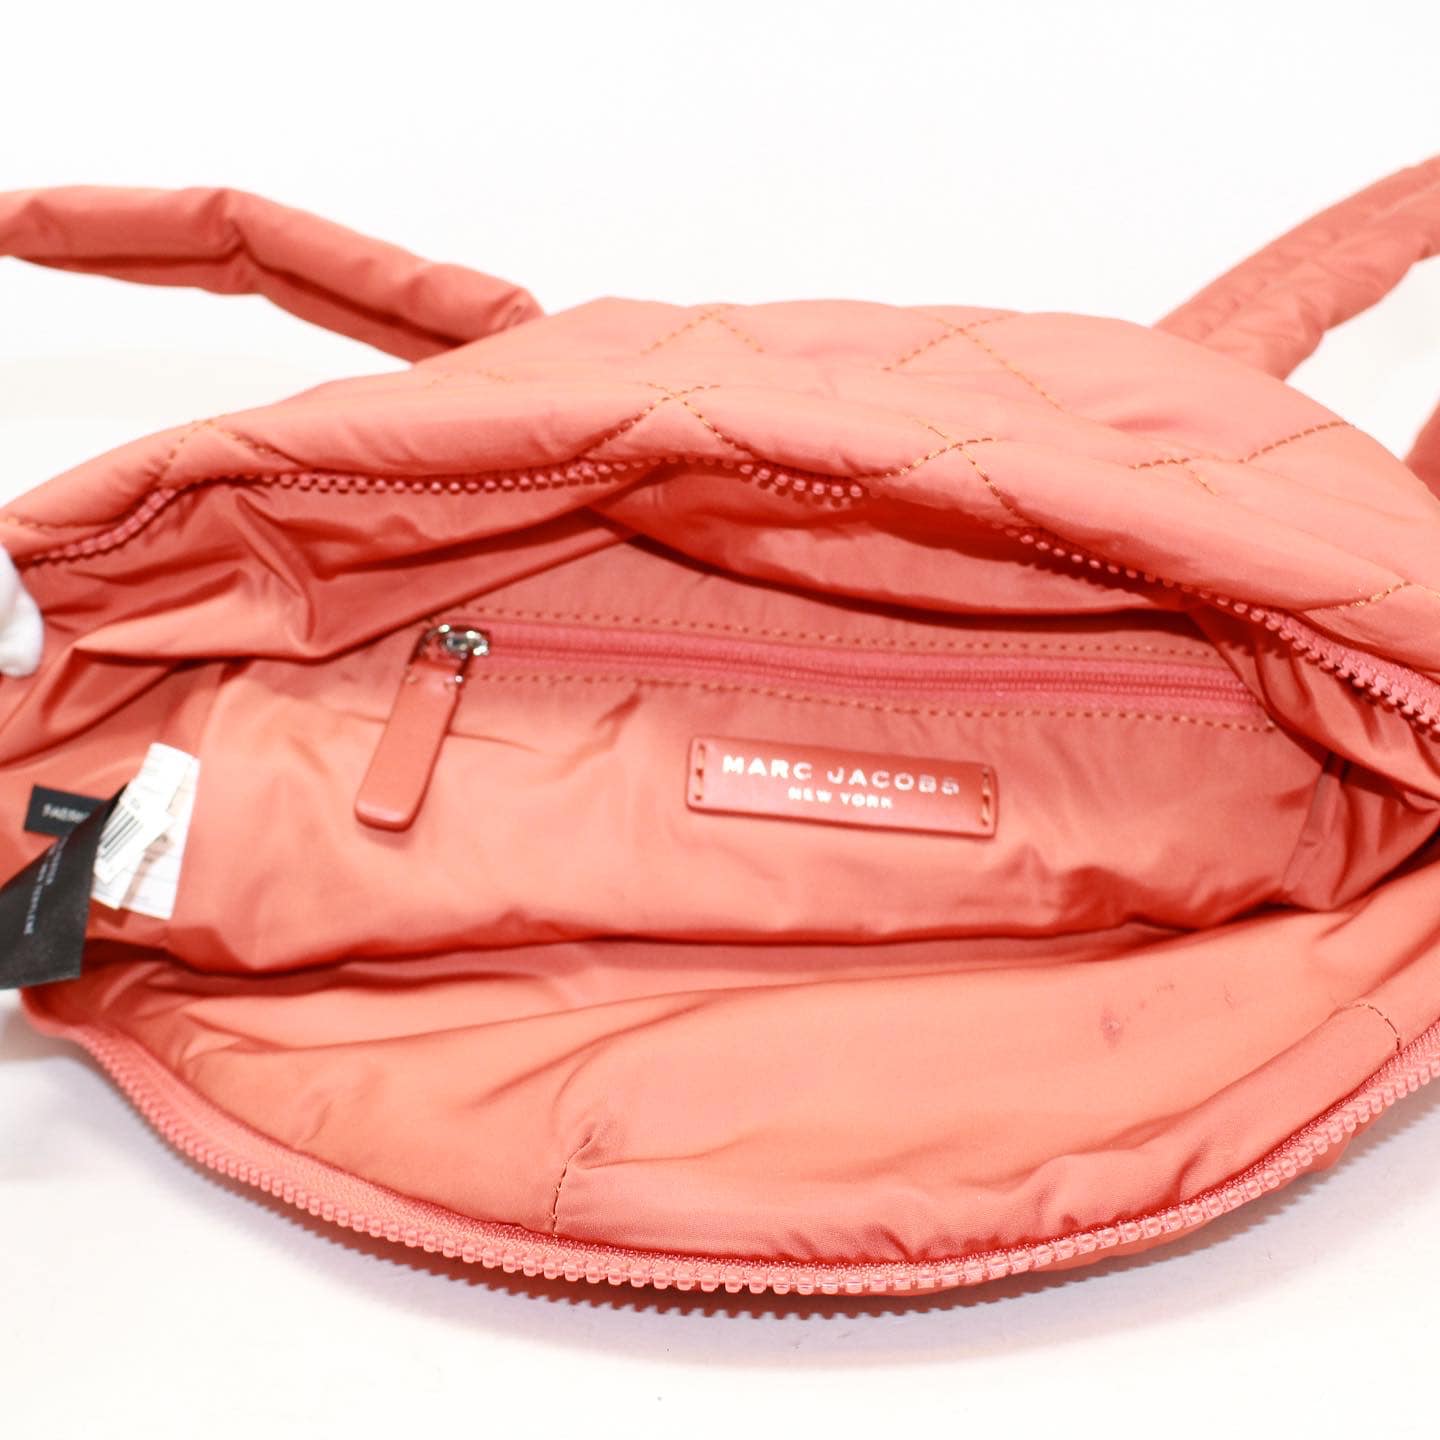 The neon pink and orange Marc Jacobs box bag. Photos by Ashley